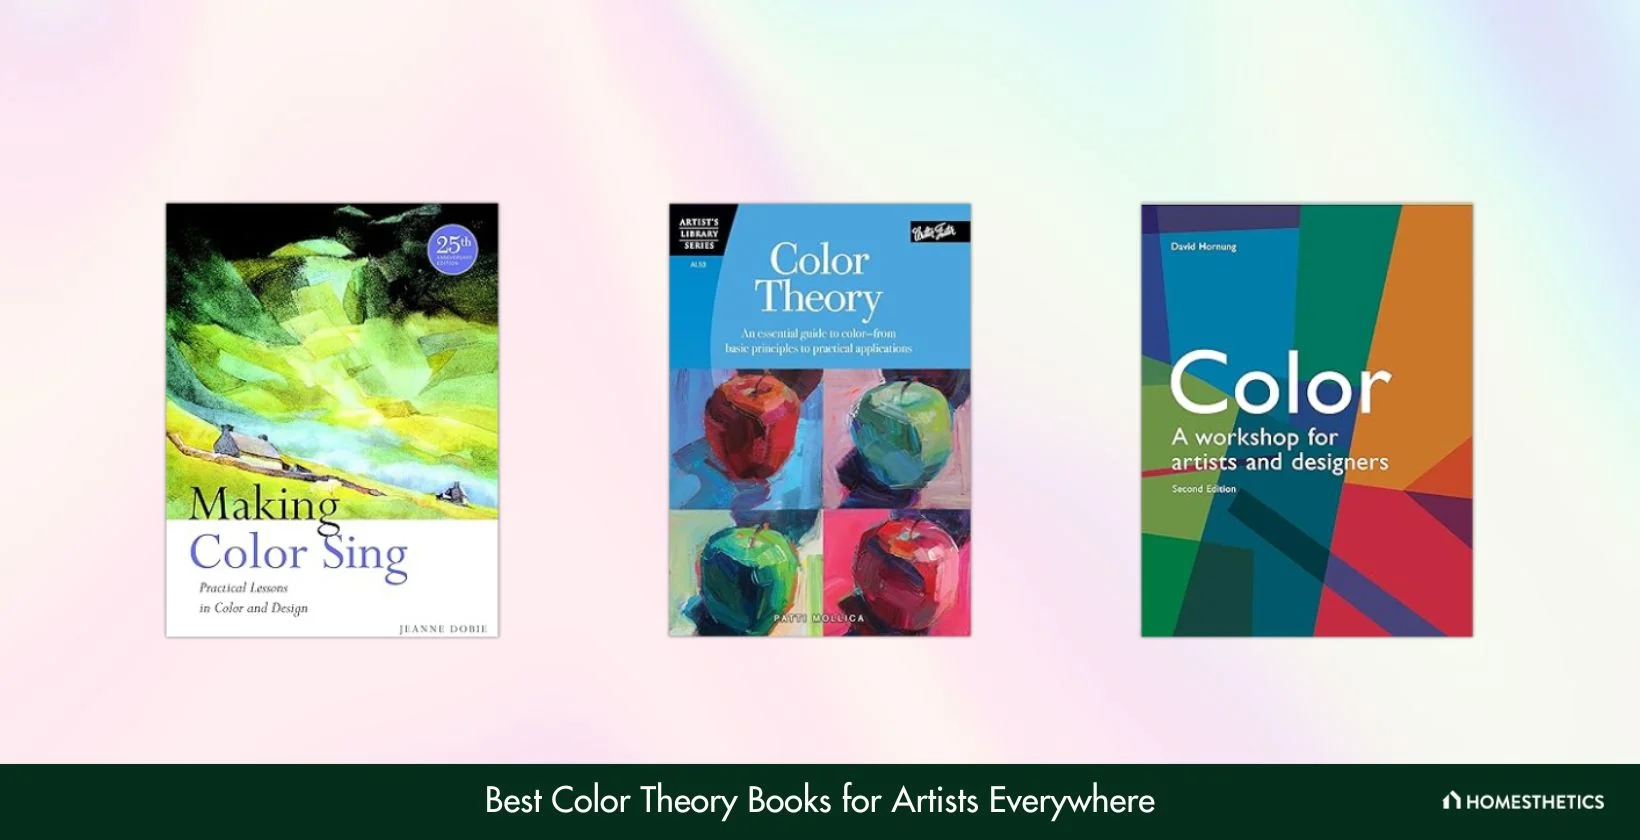 Best Color Theory Books